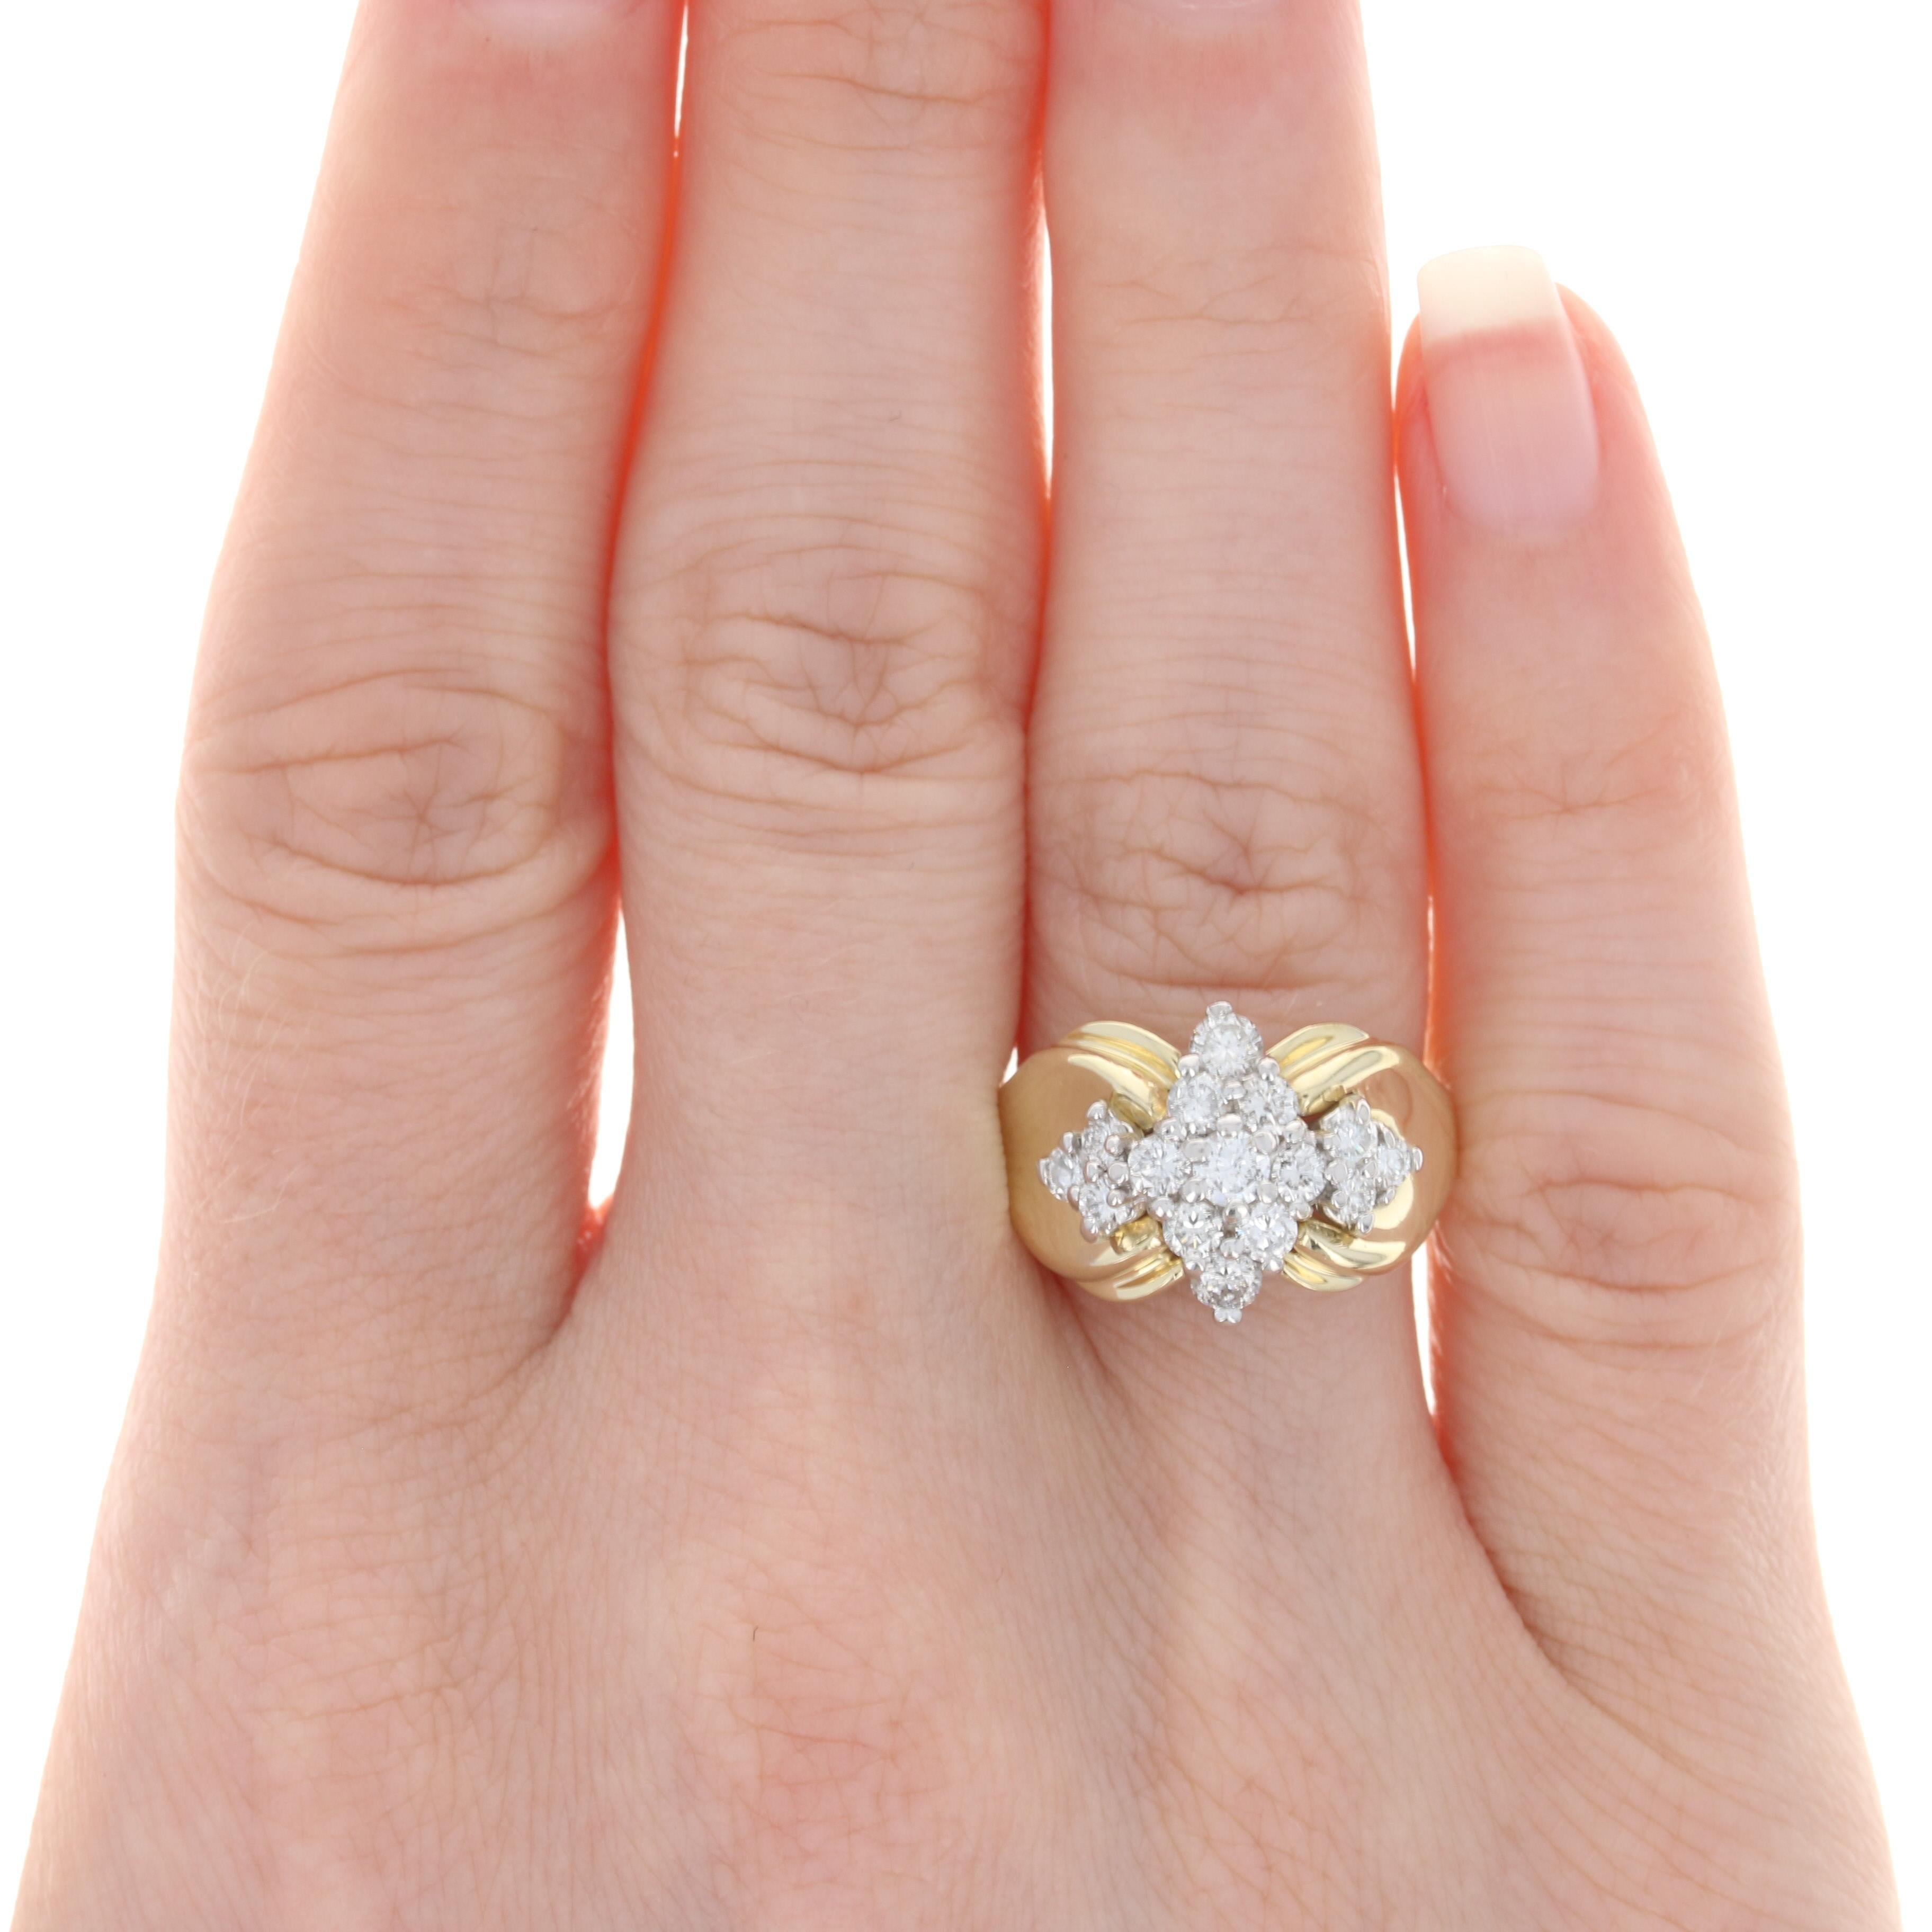 Size: 6
Sizing Fee: Down 2 sizes for a $30 fee or up 2 sizes for a $35 fee

Metal Content: 14k Yellow Gold & 14k White Gold

Stone Information: 
Natural Diamonds
Total Carats: .98ctw
Cut: Round Brilliant
Color: F - G
Clarity: SI1 - SI2

Style: